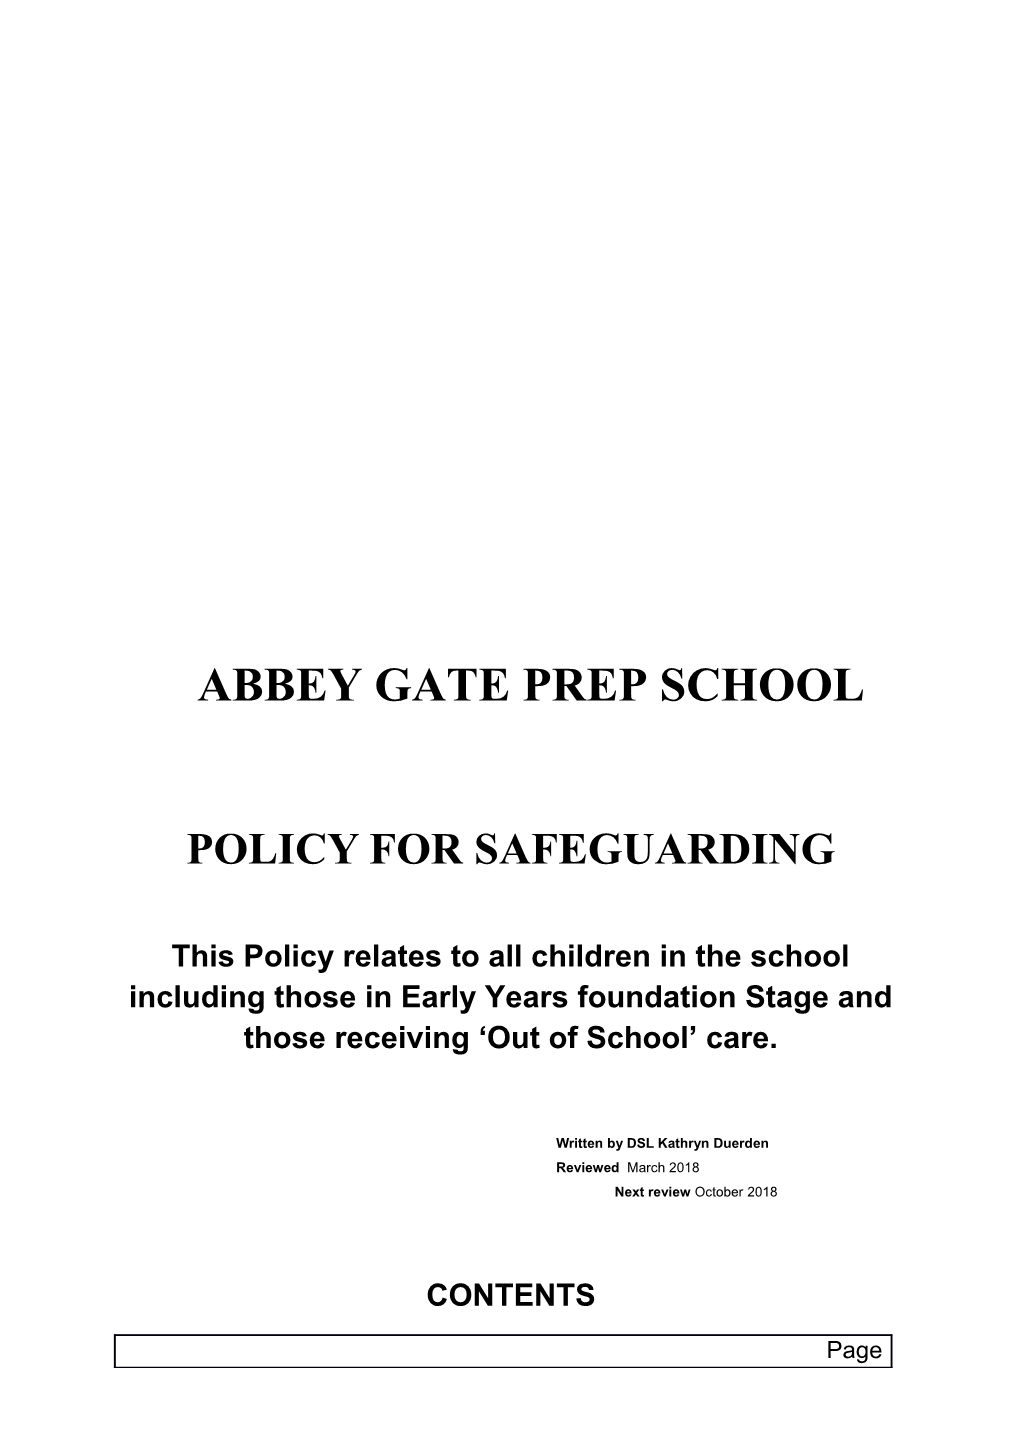 Policy for Safeguarding